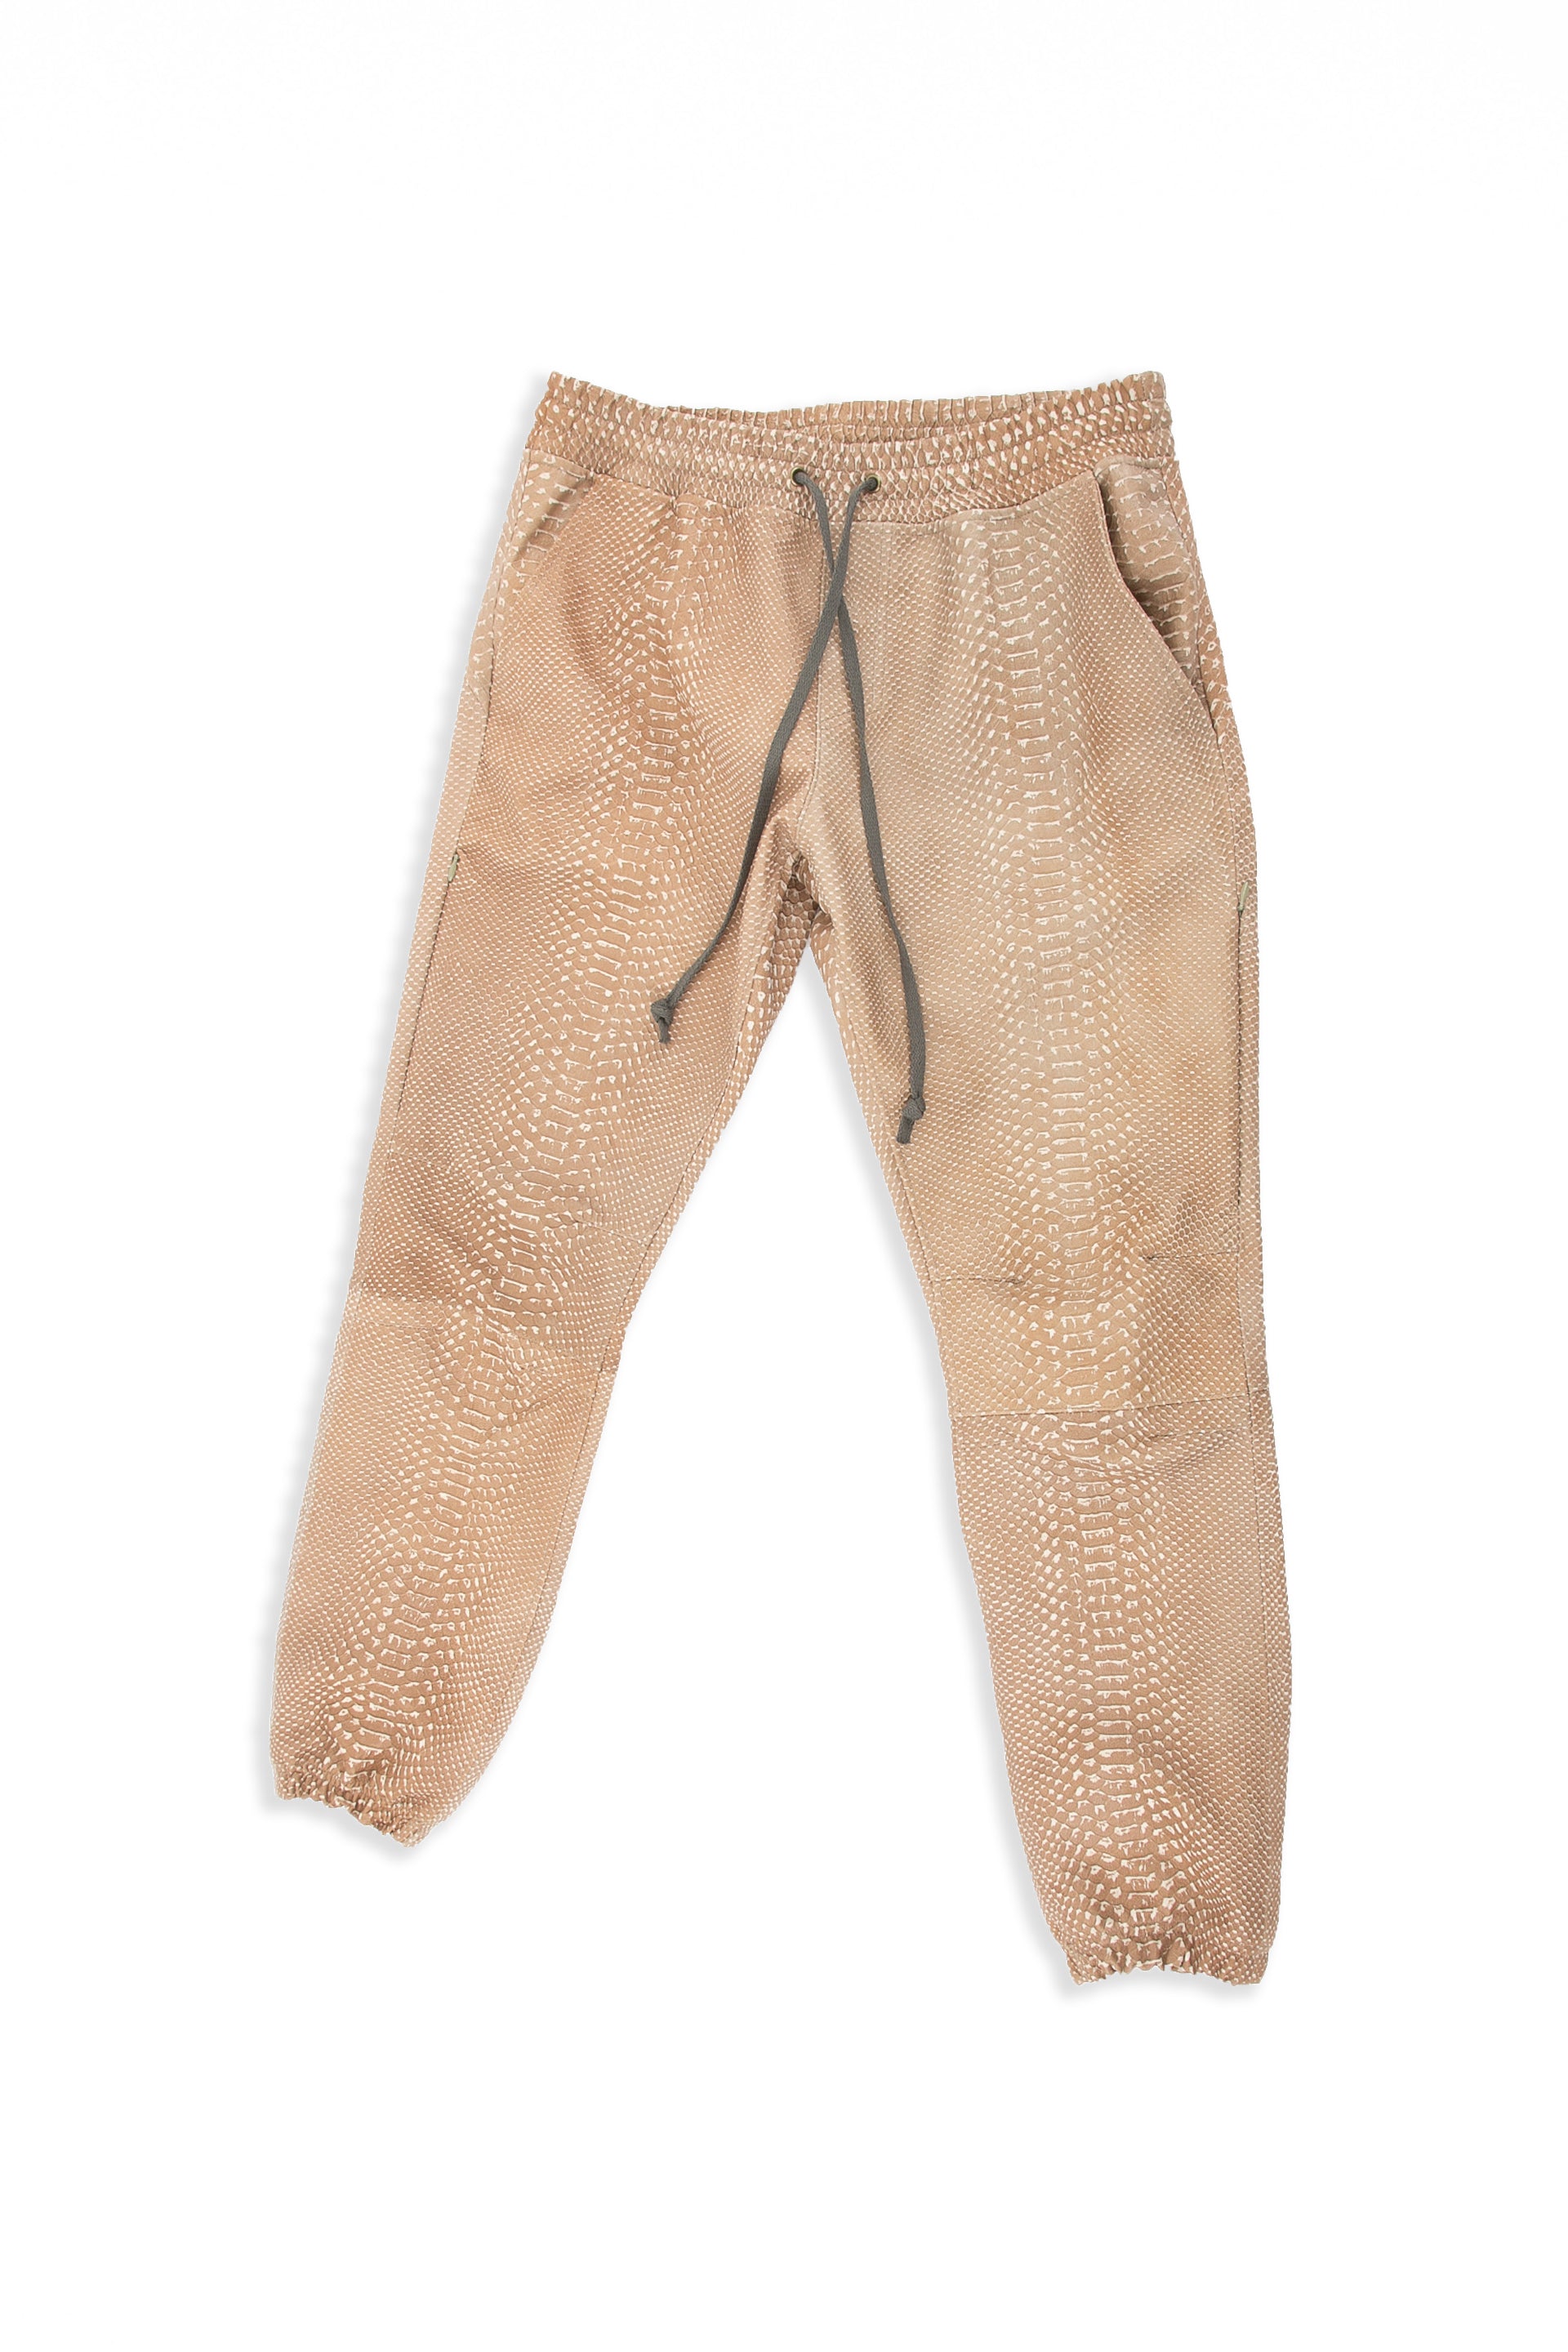 Front of Snakeskin Jogger in Tan